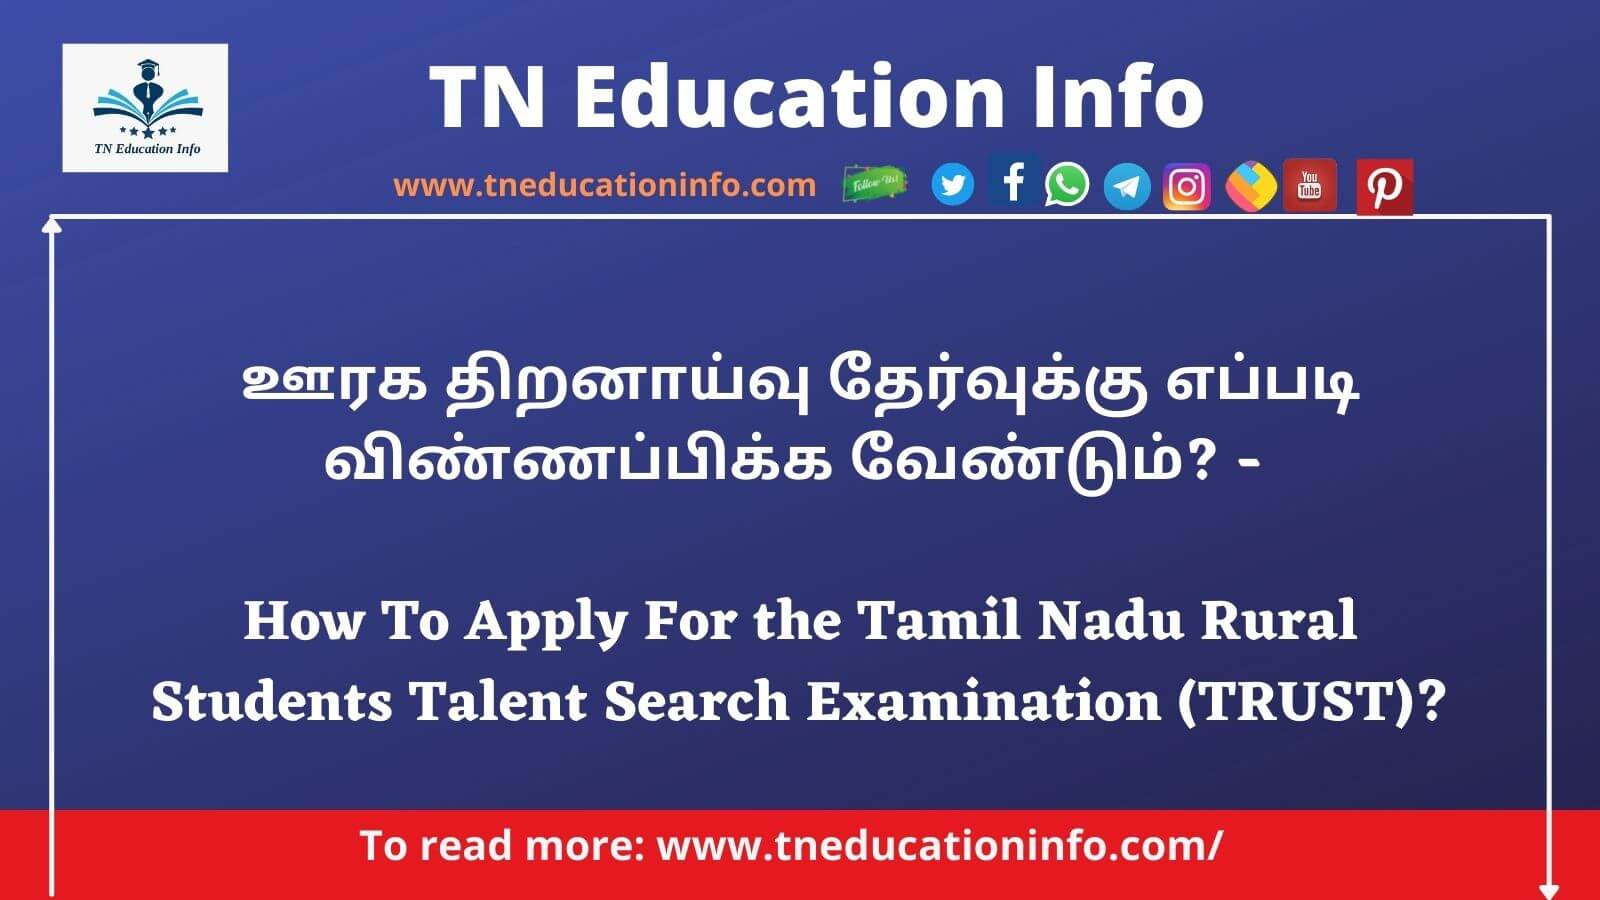 How To Apply For the Tamil Nadu Rural Students Talent Search Examination (TRUST)